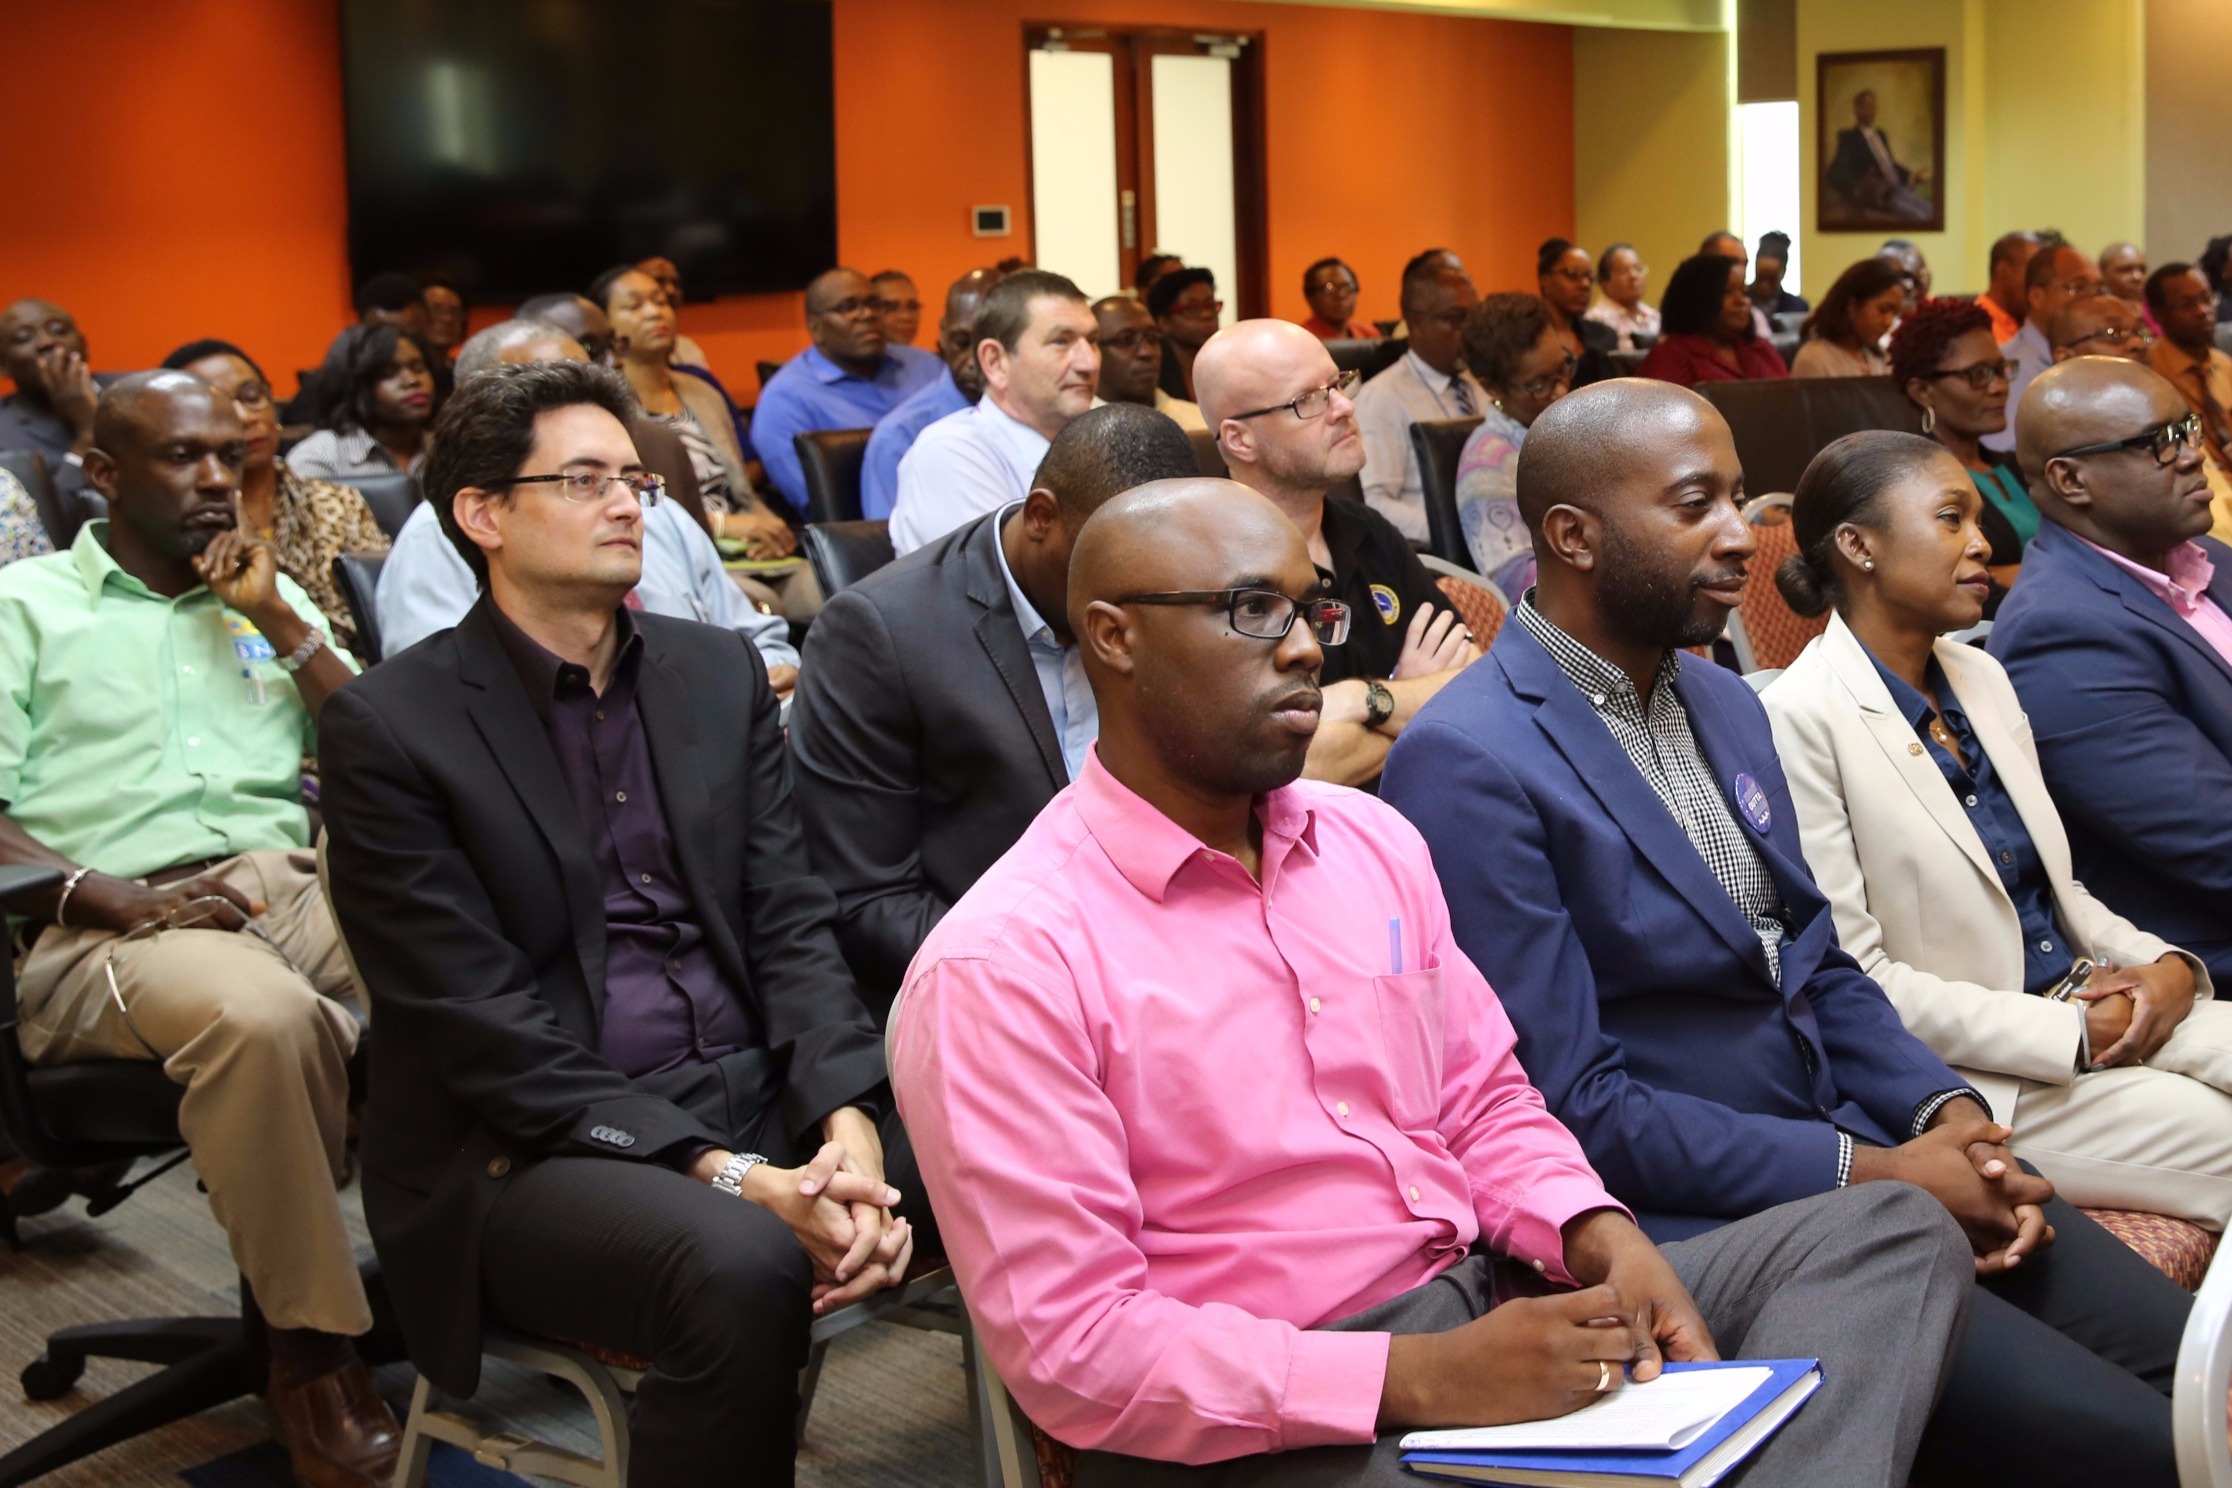 Staff listen to the address by Dr. The Right Honourable Keith Mitchell, Prime Minister of Grenada and Chairman of the Board of Governors of CDB.